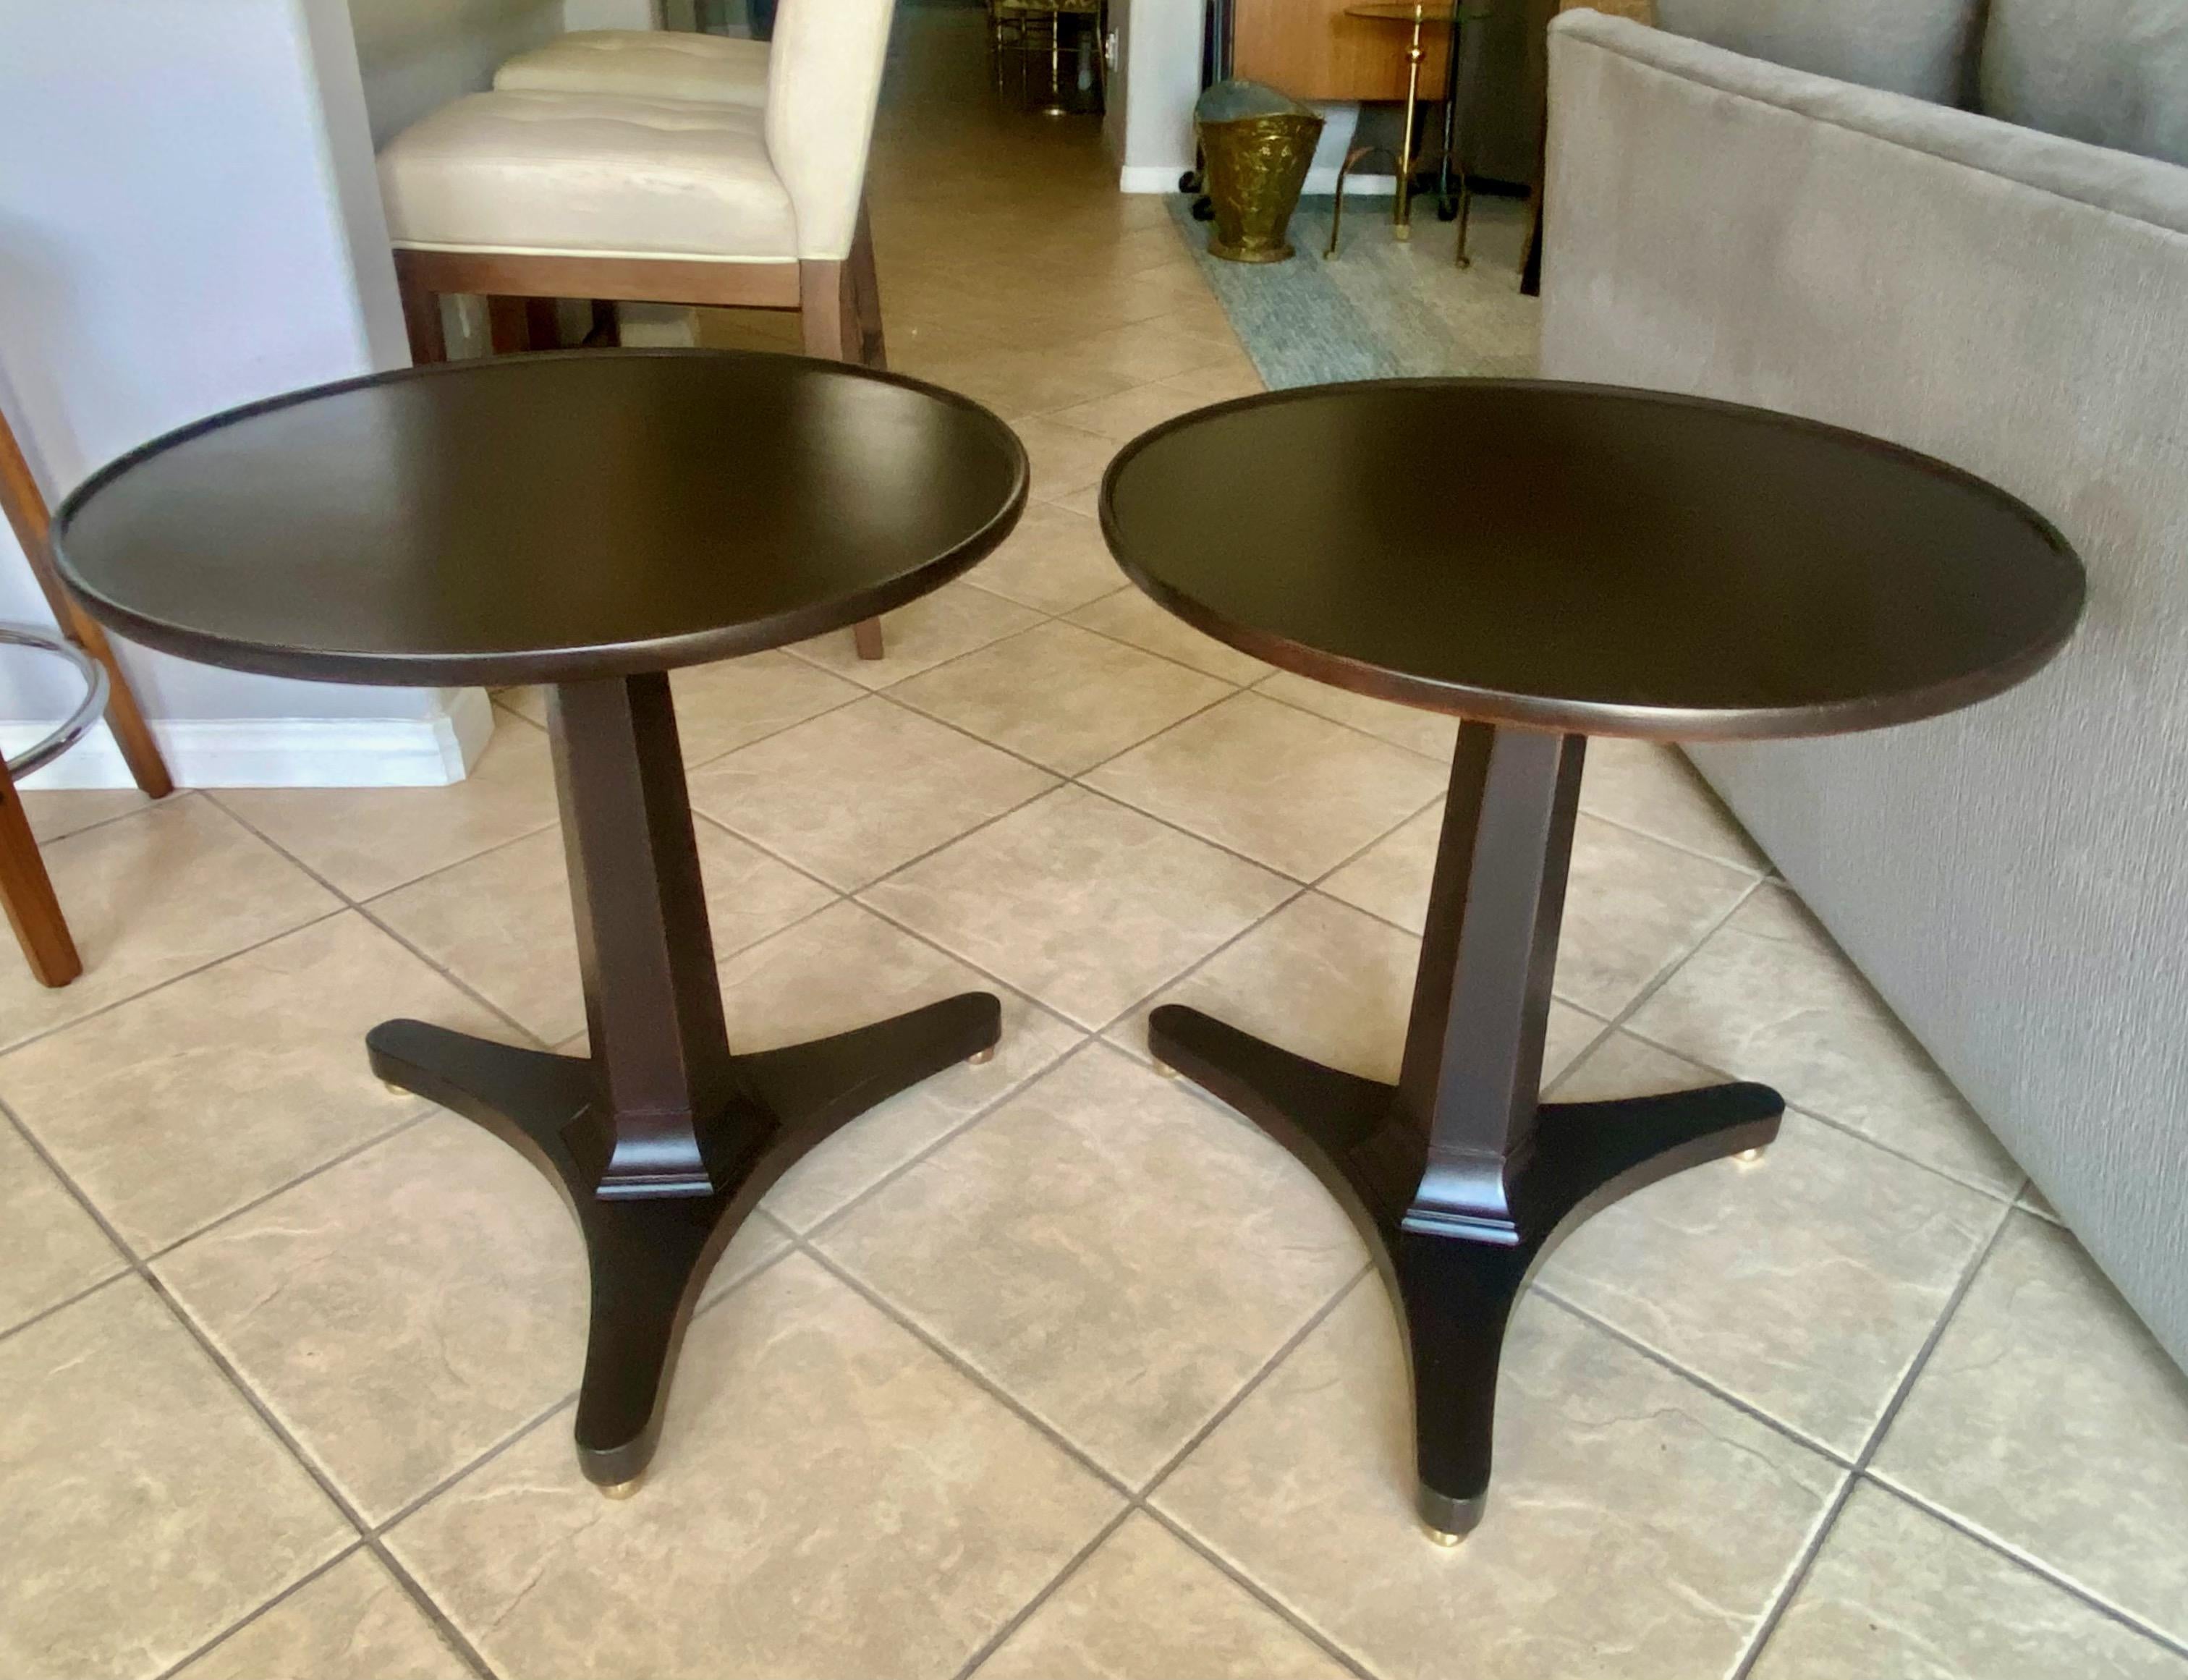 Pair of round top dark walnut/espresso lacquered finish wood side or end tables by Kittinger Furniture Company. Solid hard wood construction tables resting on center post with tripod legs and brass sabot feet. More recently refinished.